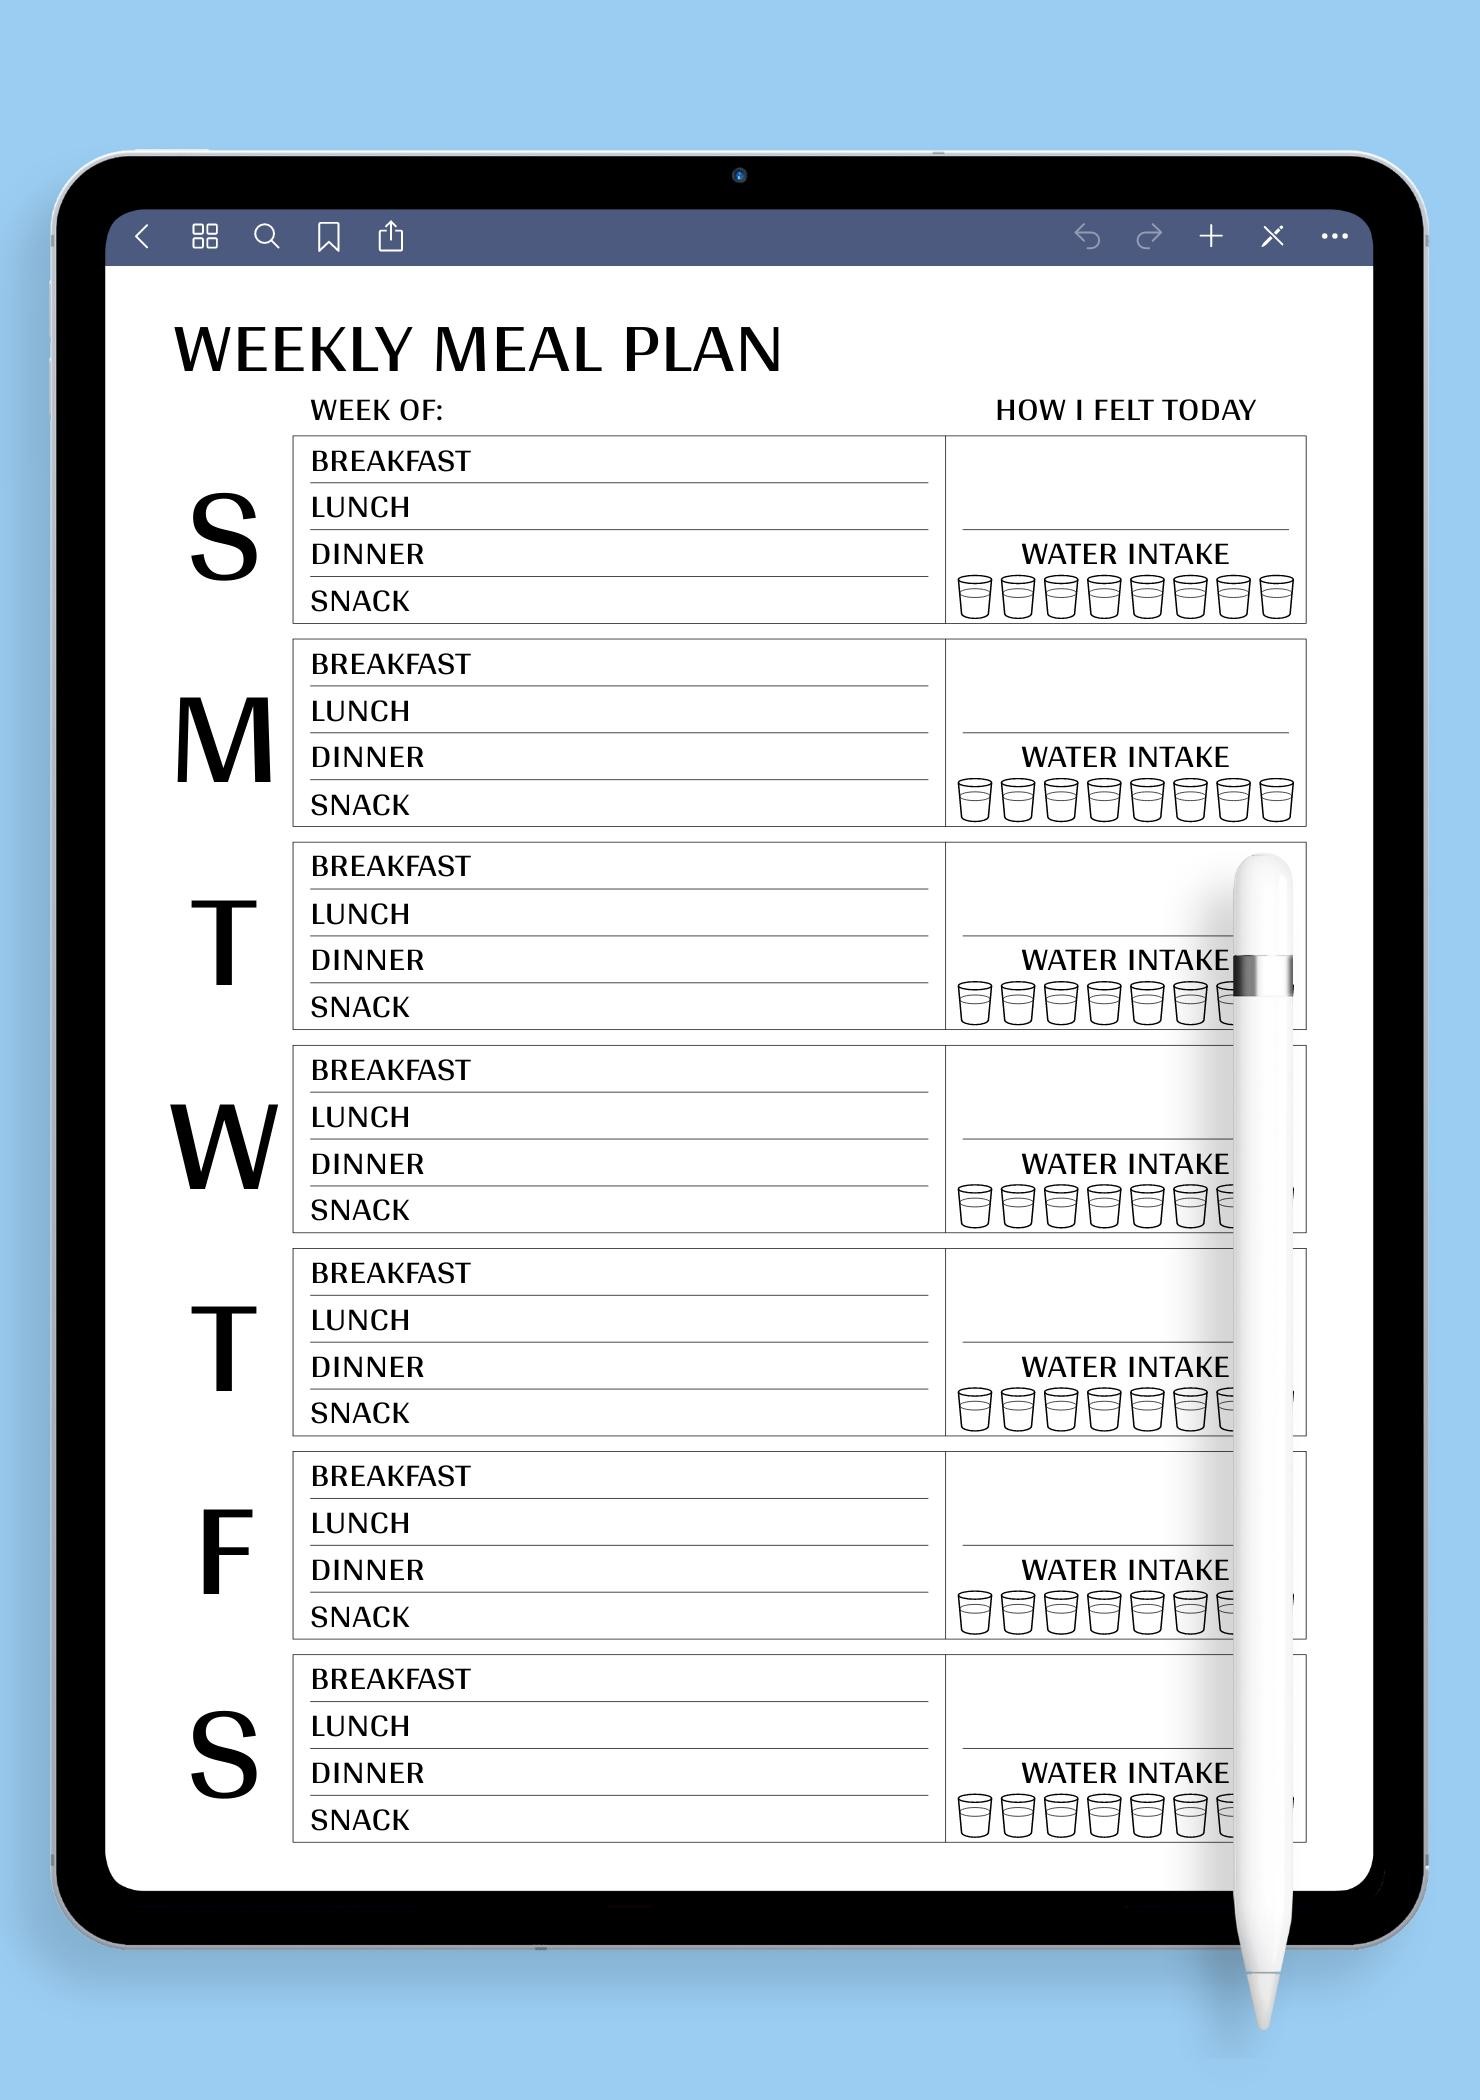 https://onplanners.com/sites/default/files/styles/template_fancy/public/teaser-photos/weekly-meal-plan-template-ipad.jpeg